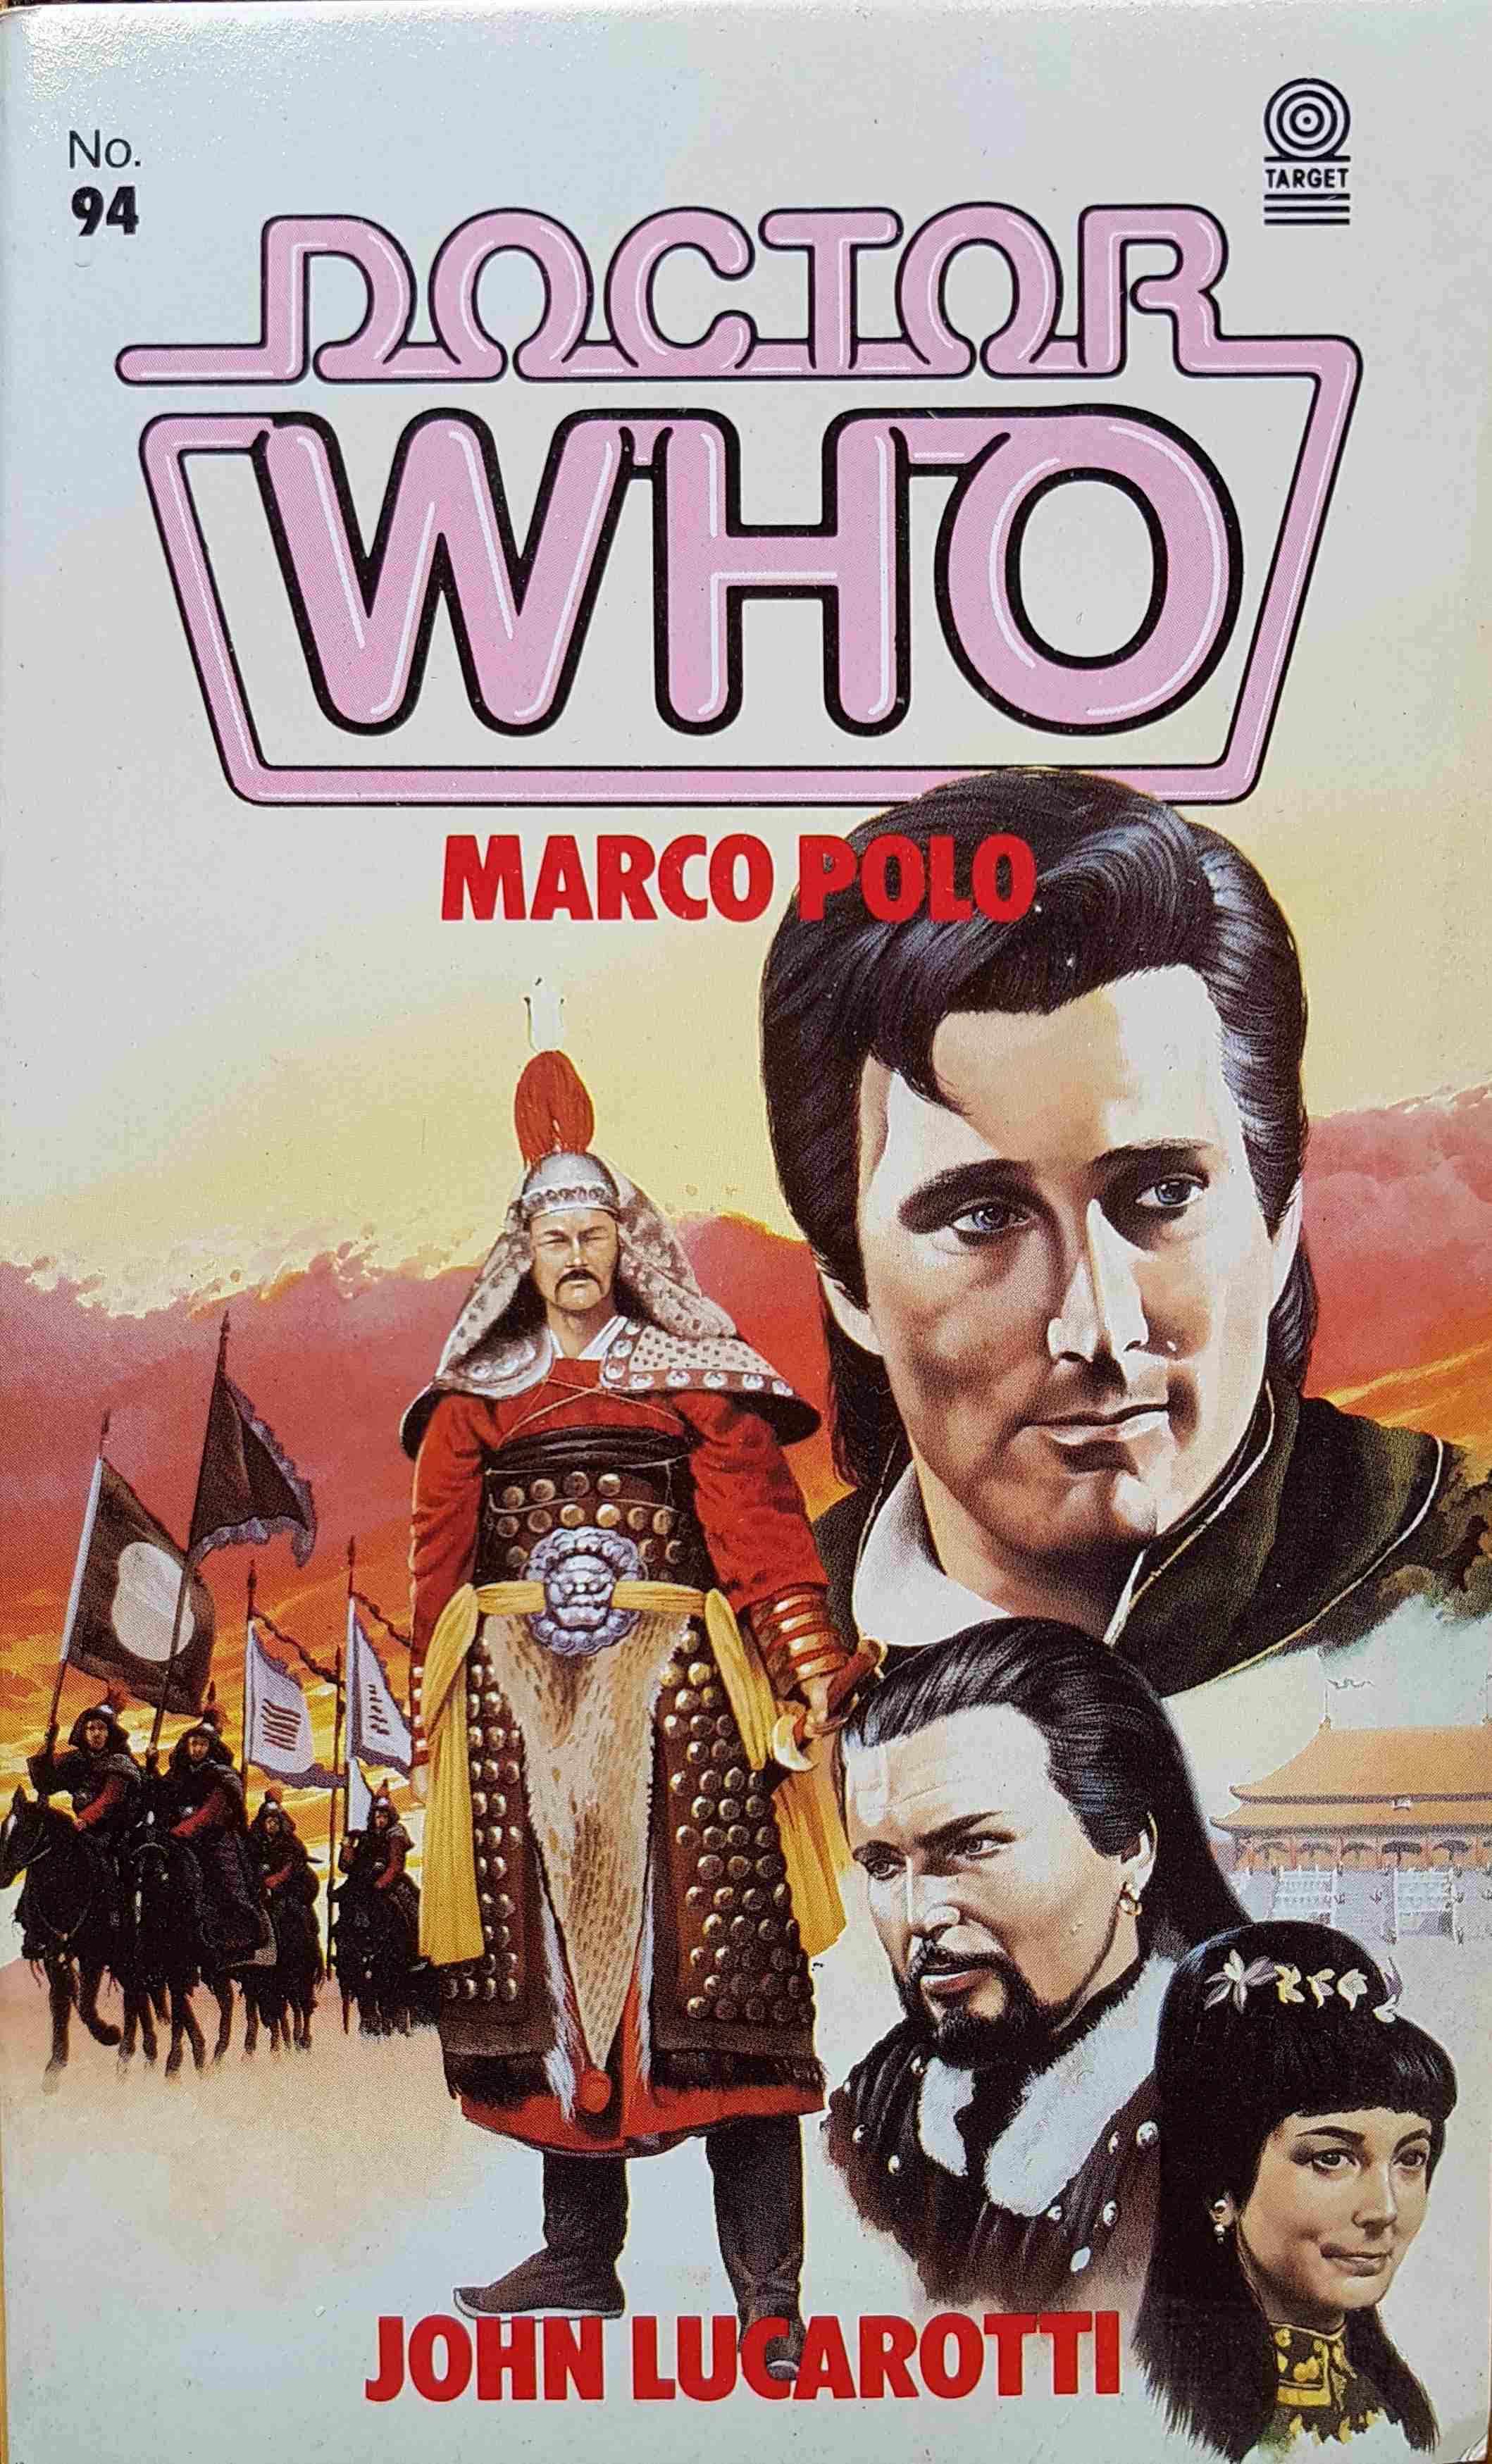 Picture of Doctor Who - Marco Polo by artist John Lucarotti from the BBC books - Records and Tapes library